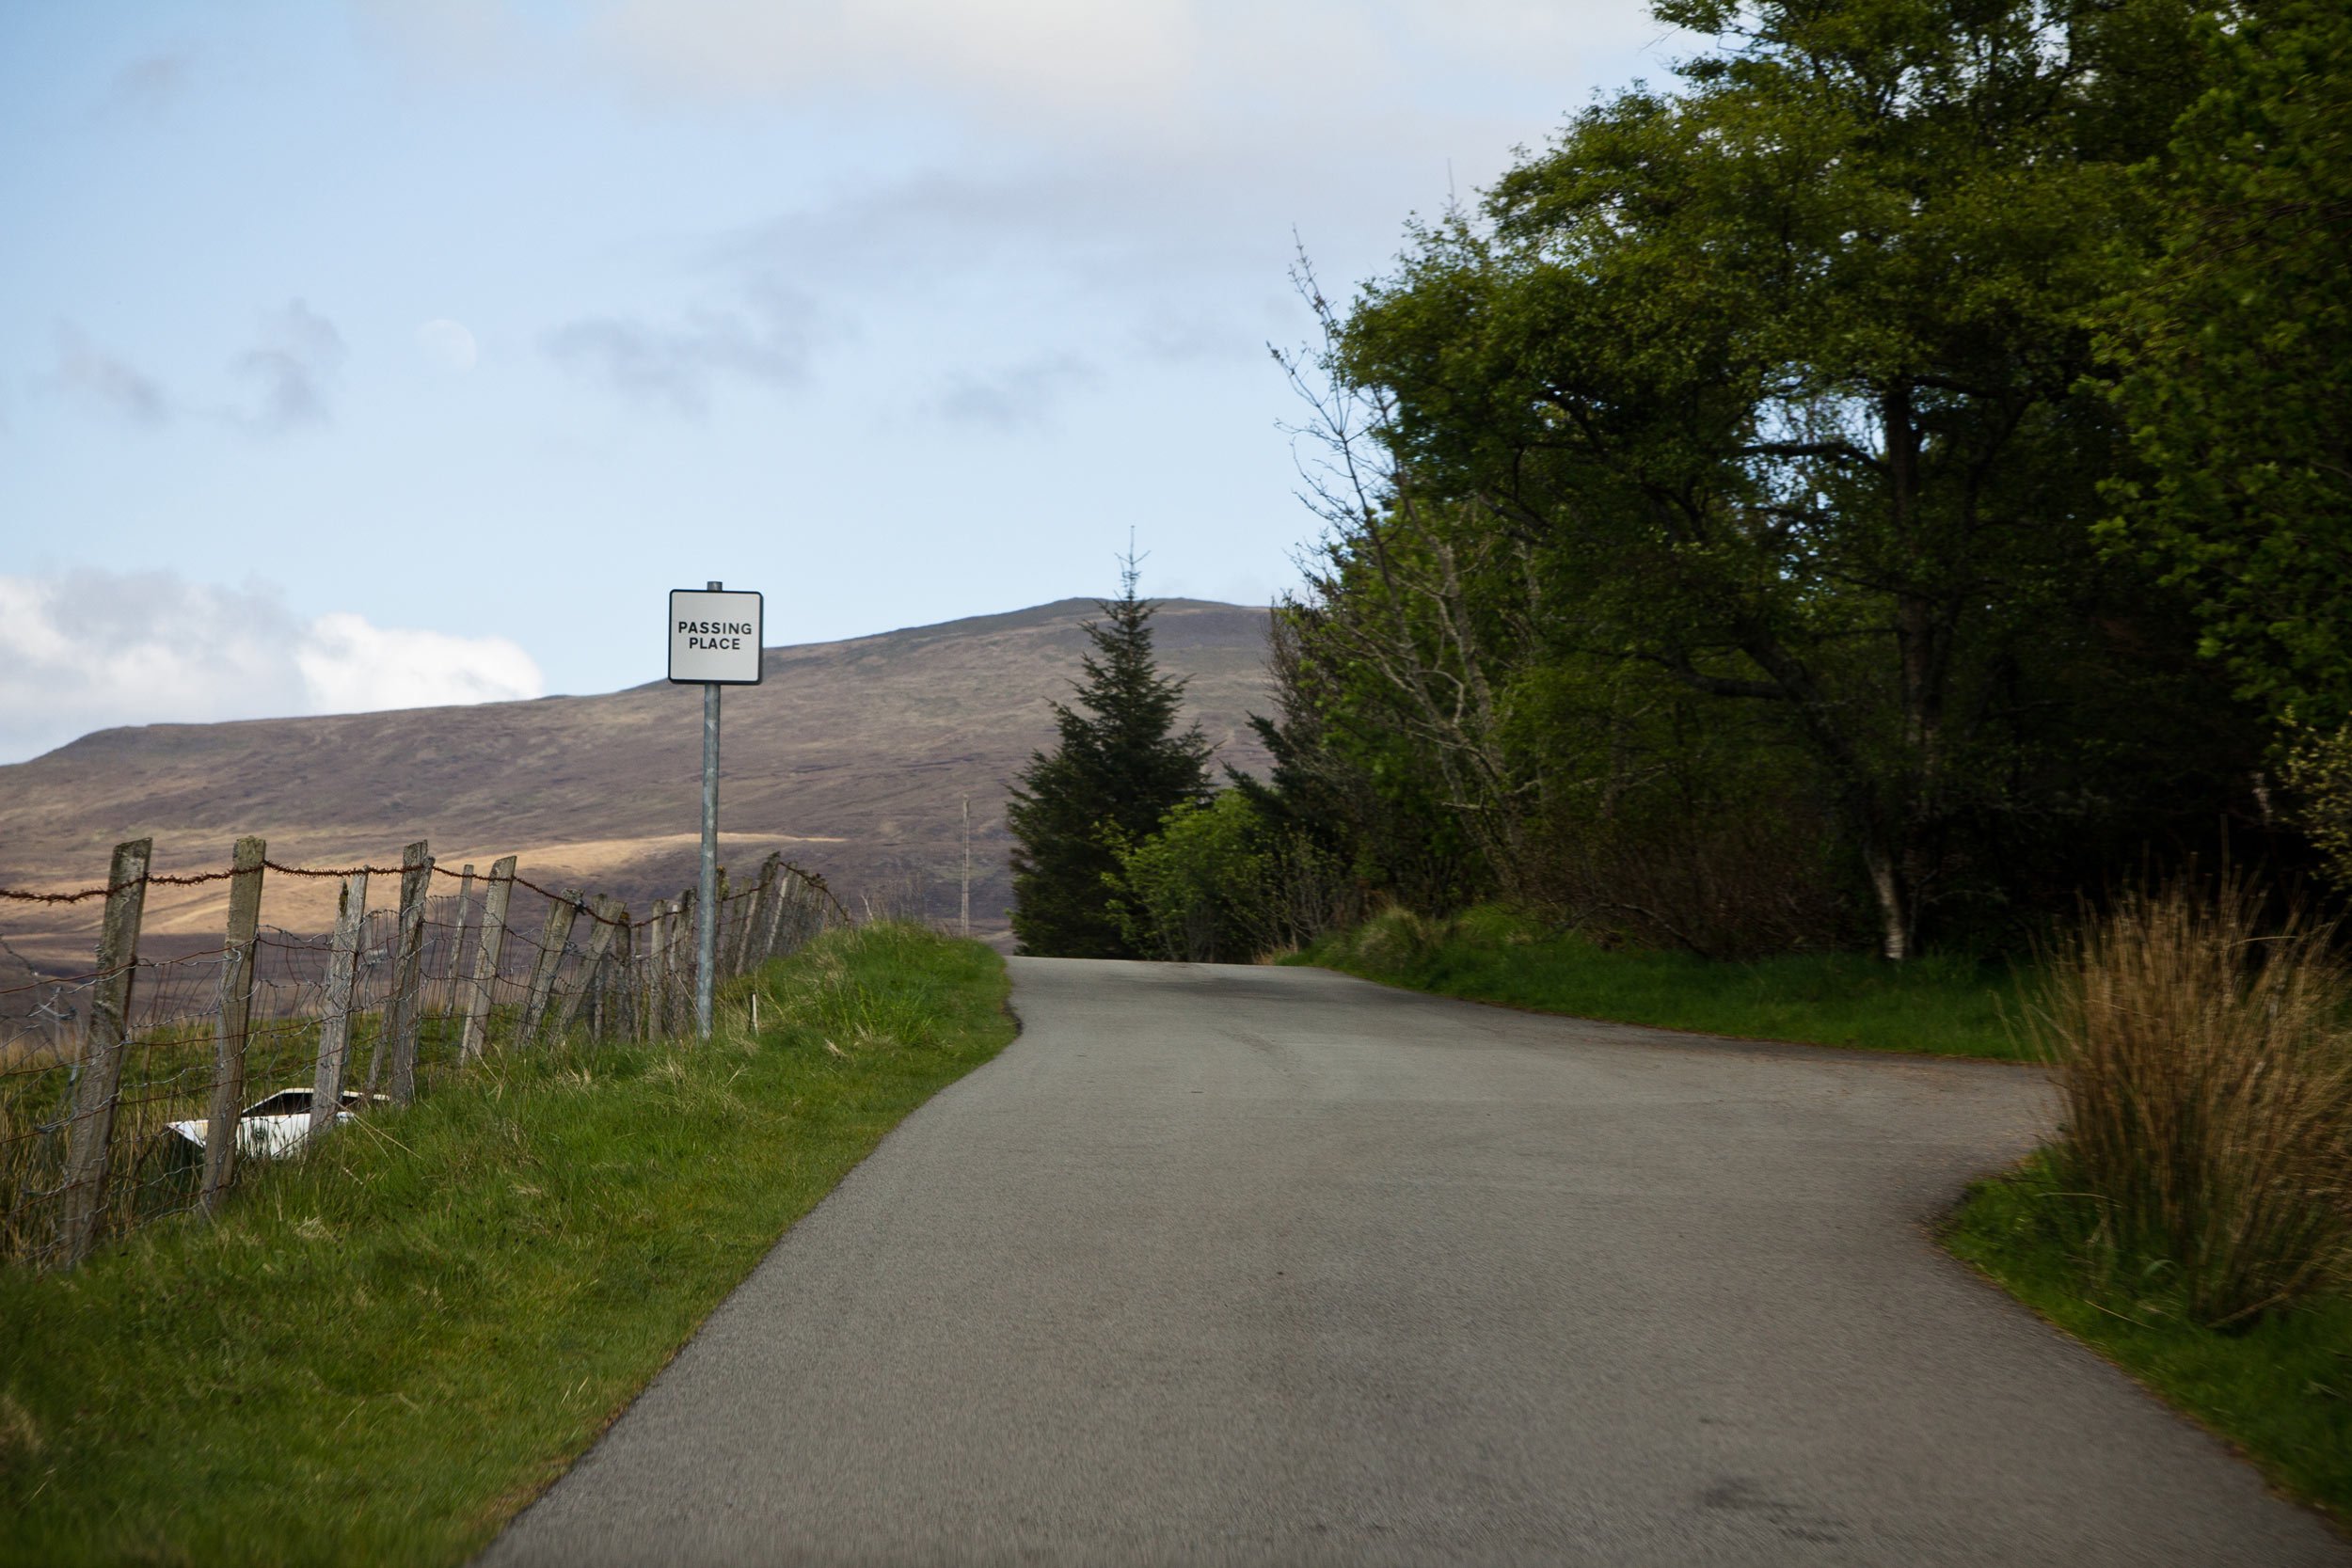 passing-place-on-a-one-lane-road-in-scotland